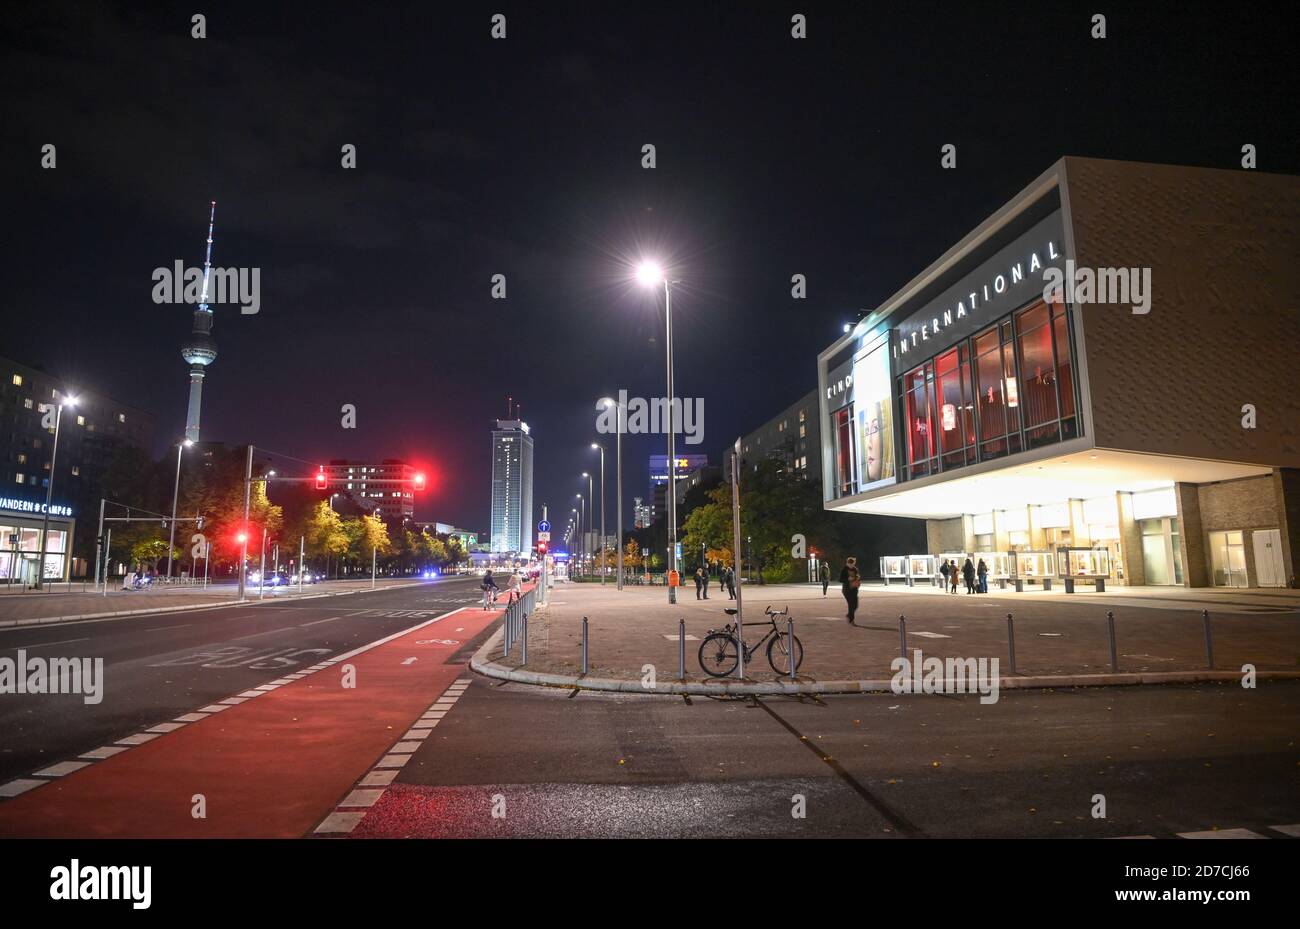 Berlin, Germany. 21st Oct, 2020. The television tower, the Hotel Park Inn and the Kino International on Karl-Marx-Allee with a view towards Alexanderplatz in the evening. Credit: Jens Kalaene/dpa-Zentralbild/ZB/dpa/Alamy Live News Stock Photo